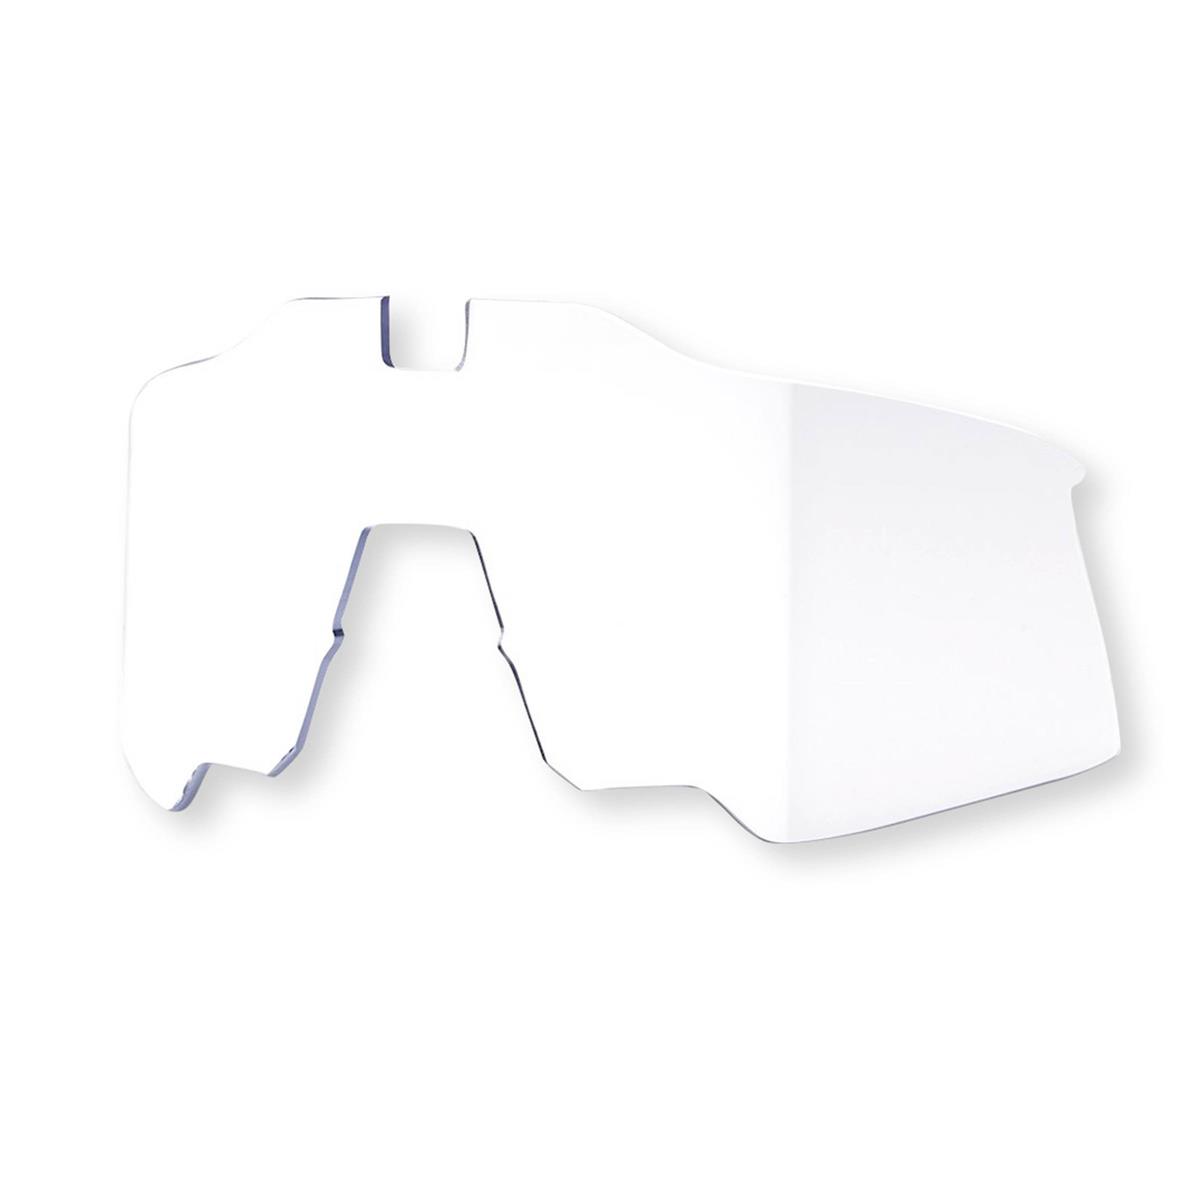 100% Replacement Lens The Speedcraft Air Clear